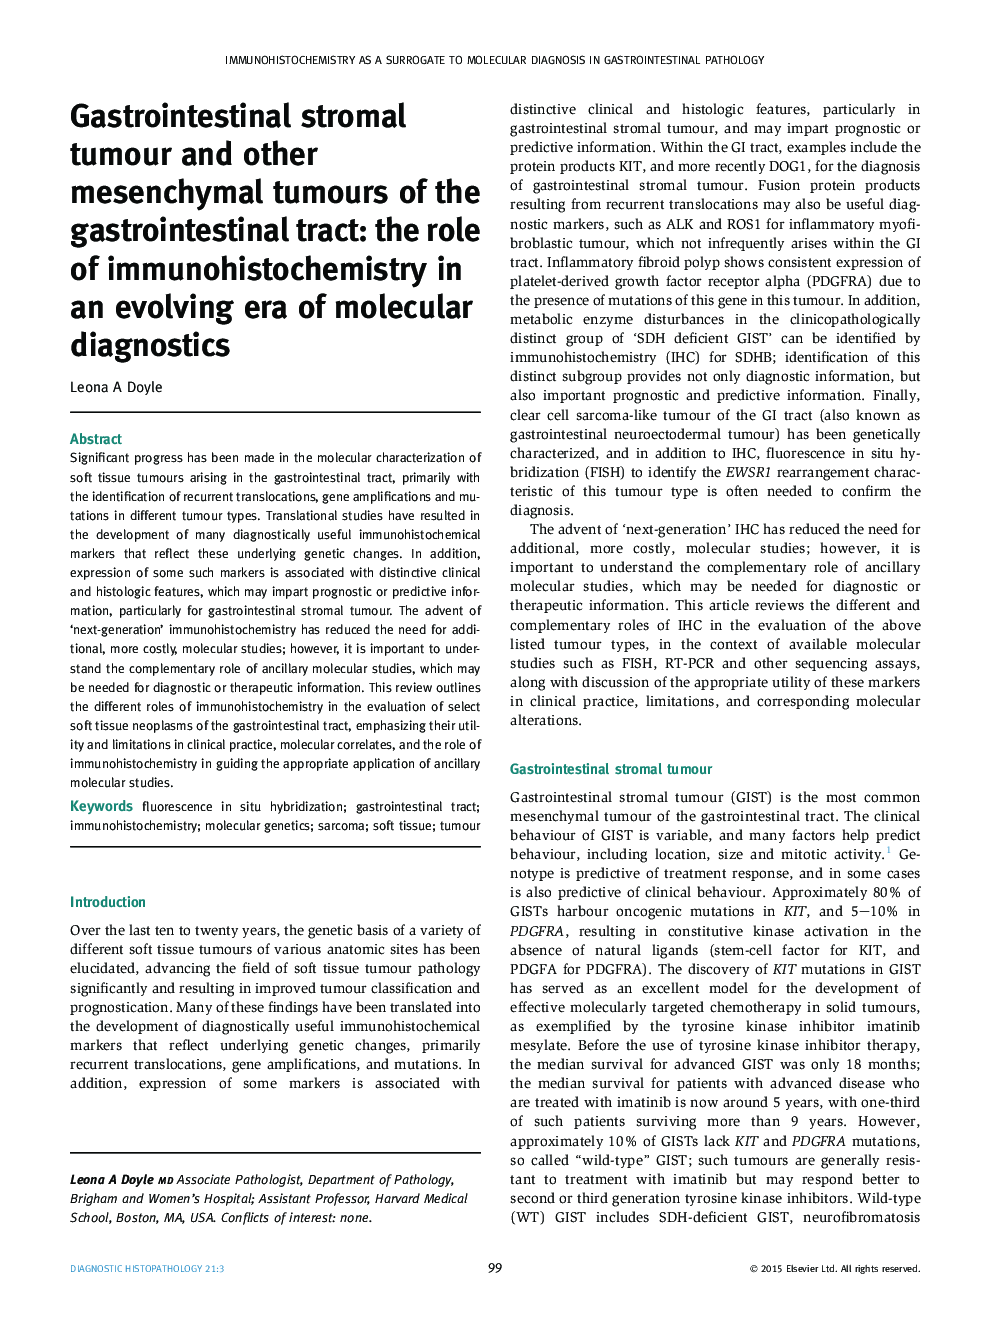 Gastrointestinal stromal tumour and other mesenchymal tumours of the gastrointestinal tract: the role of immunohistochemistry in an evolving era of molecular diagnostics